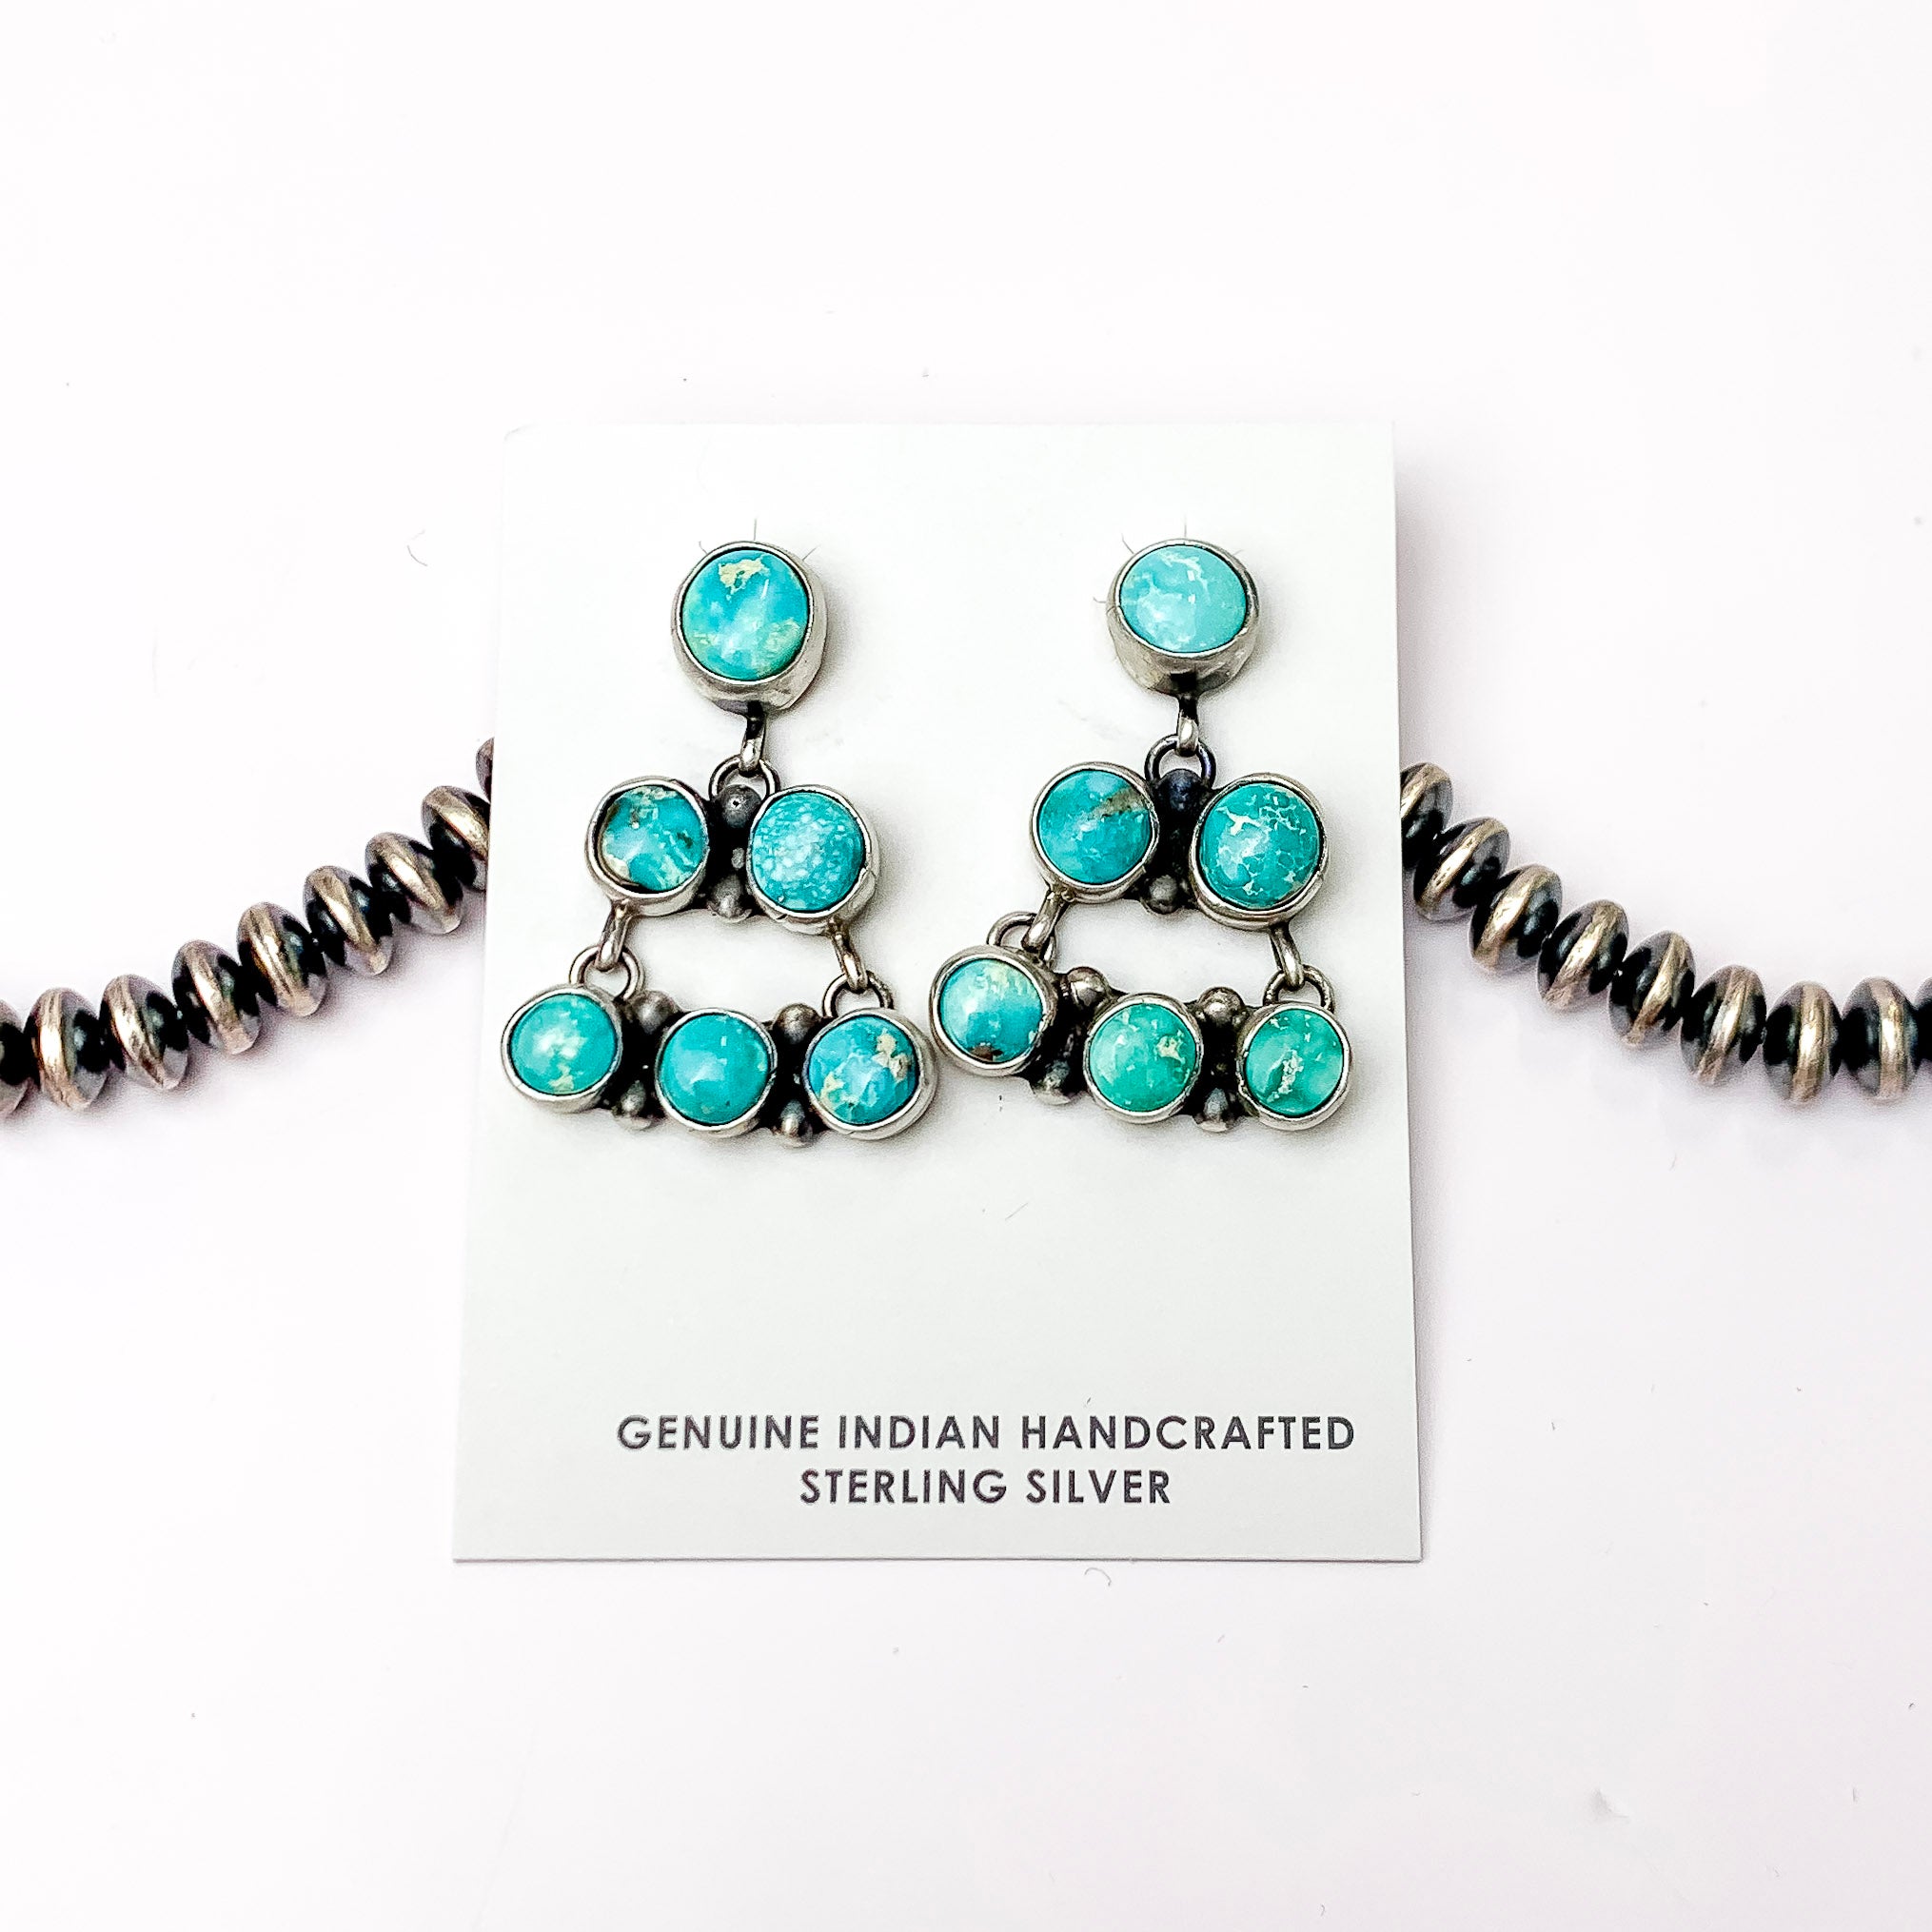 Lorenzo Sam | Navajo Handmade Sterling Silver Tiered Post Earrings with Kingman Turquoise Stones - Giddy Up Glamour Boutique